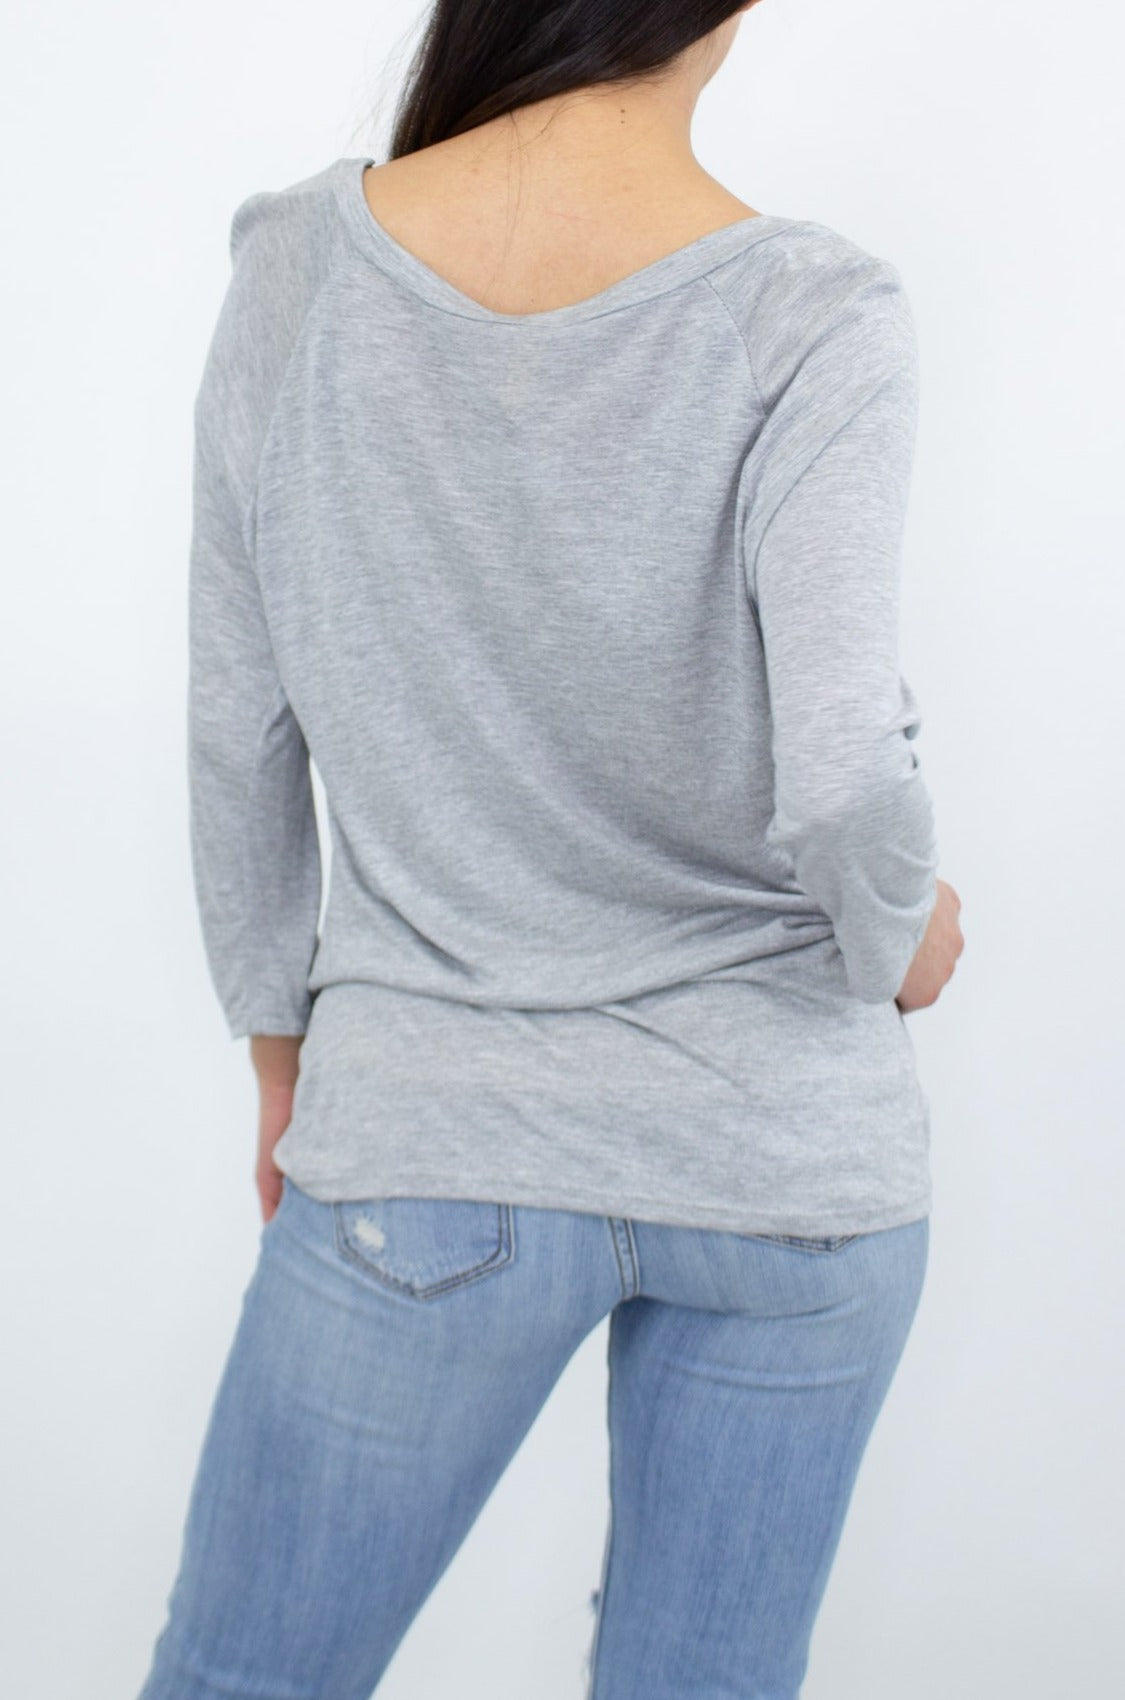 Twisted Front Comfortable Top - Heather grey